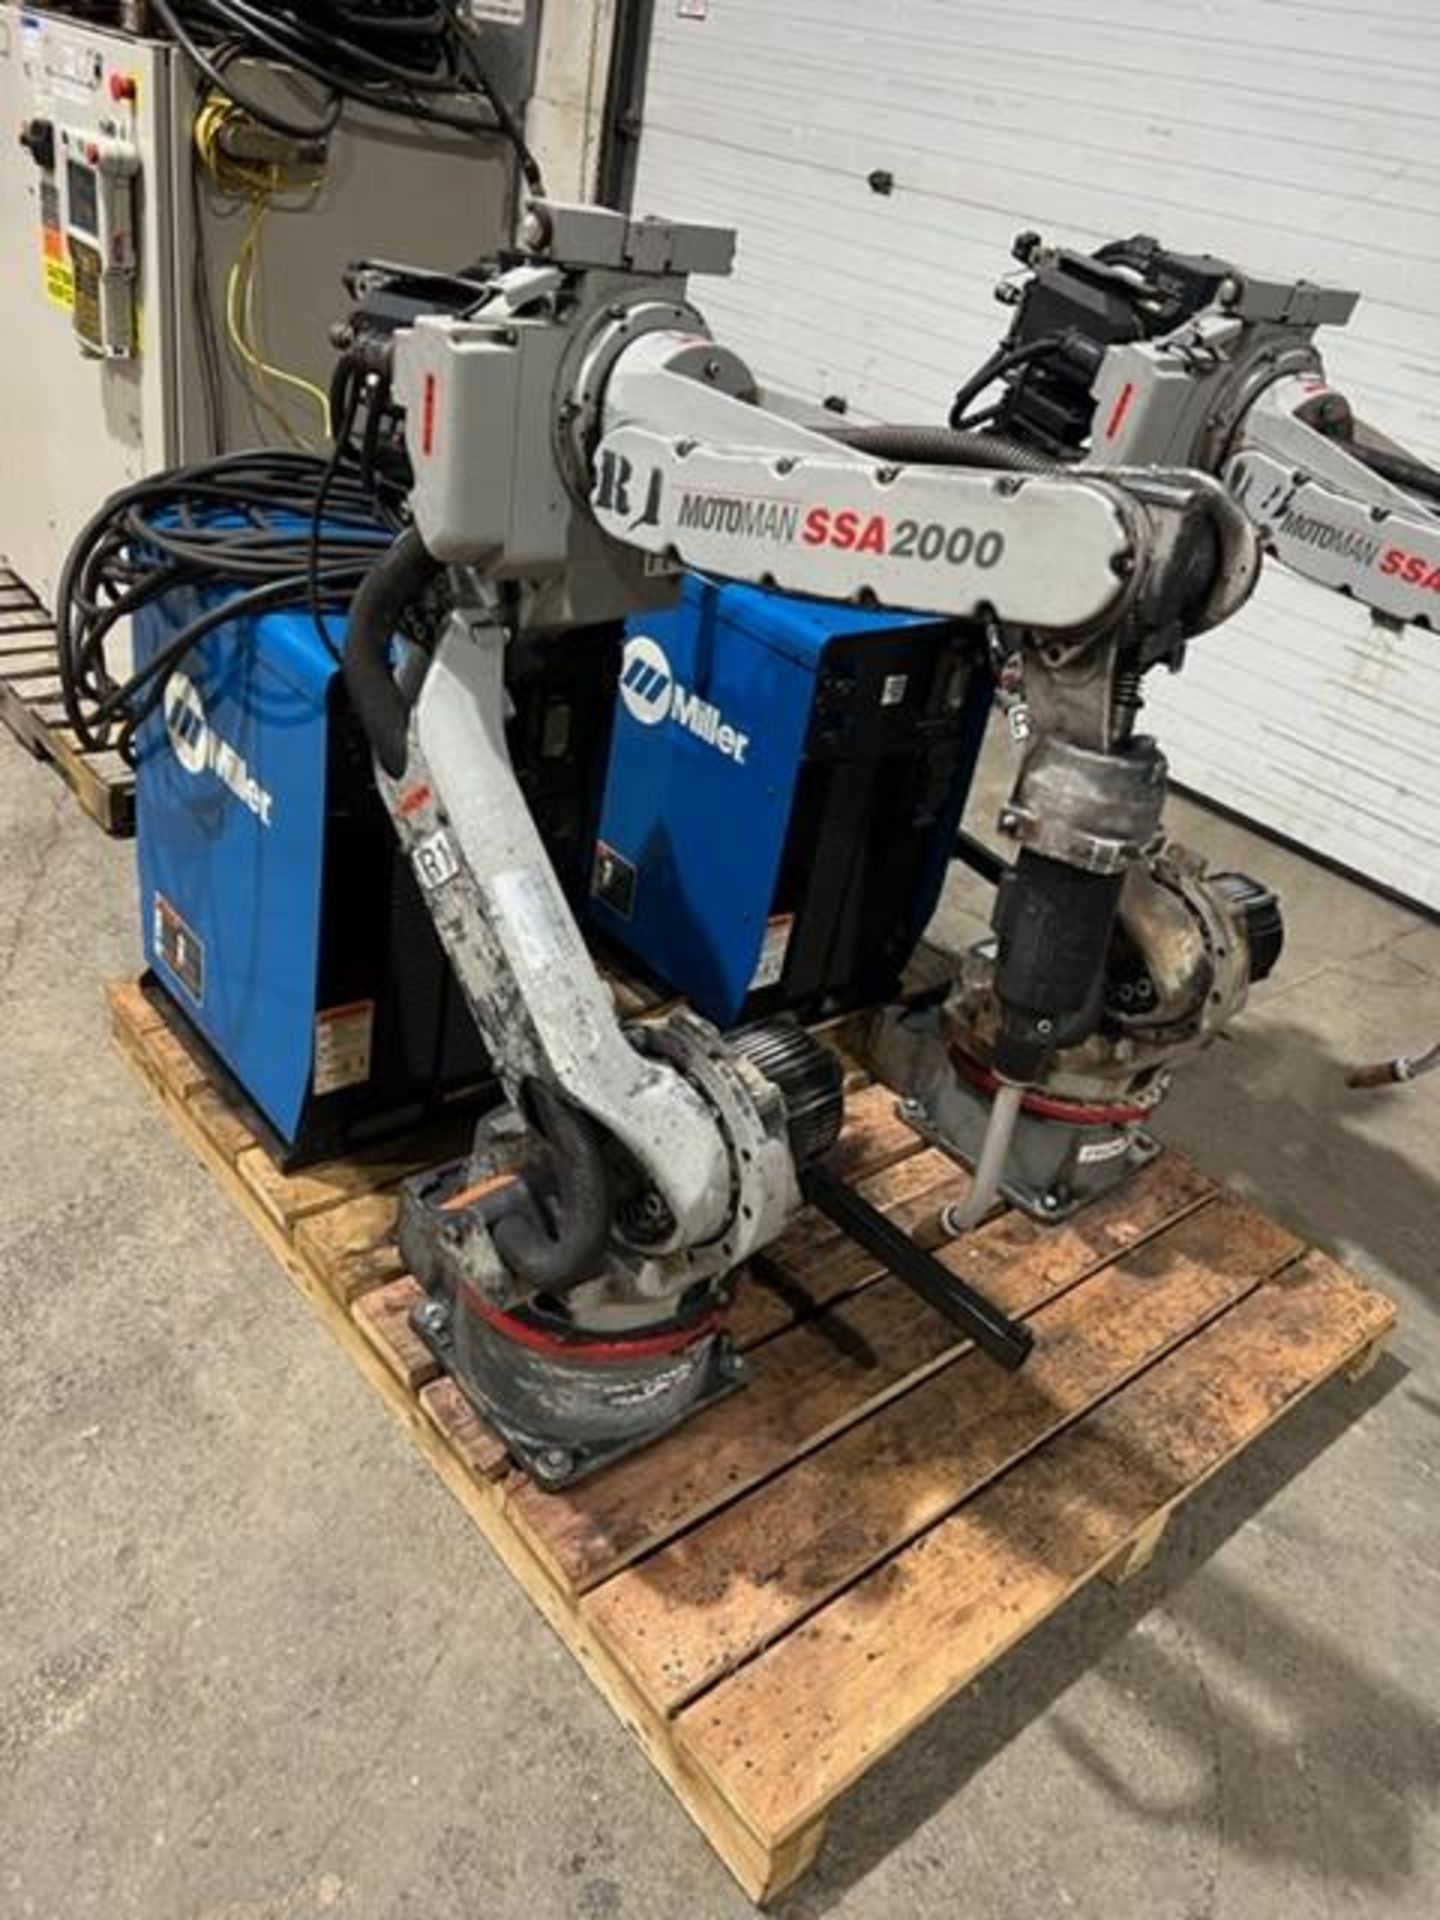 Set of 2 (2 units) 2007 Motoman SSA 2000 Welding Robots Complete with Auto Axcess 450 Welding - Image 4 of 5